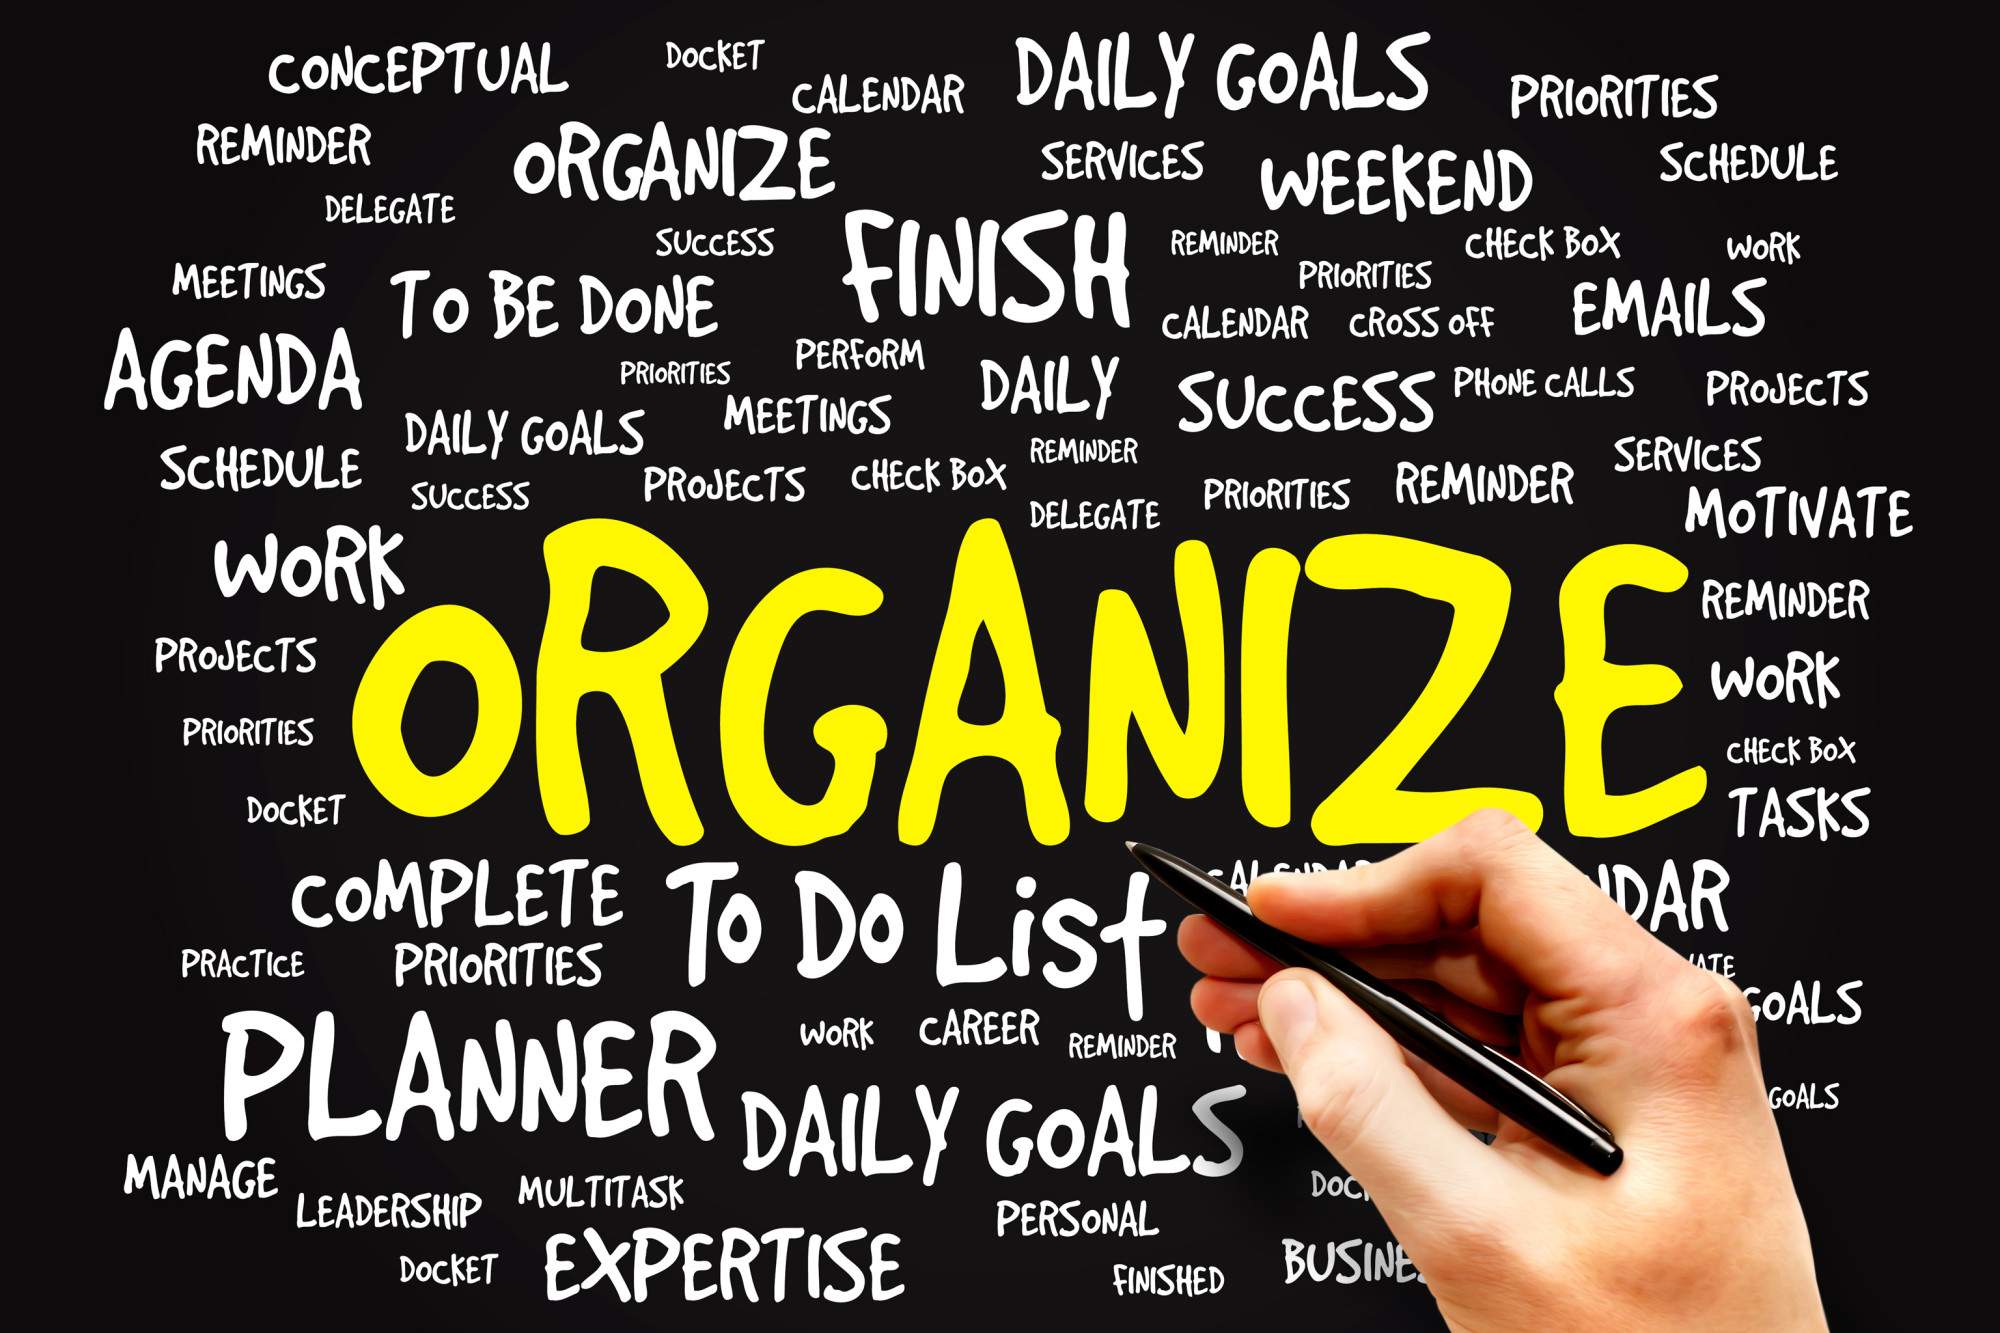 Business Organization 101: A Guide to Get You on the Right Track